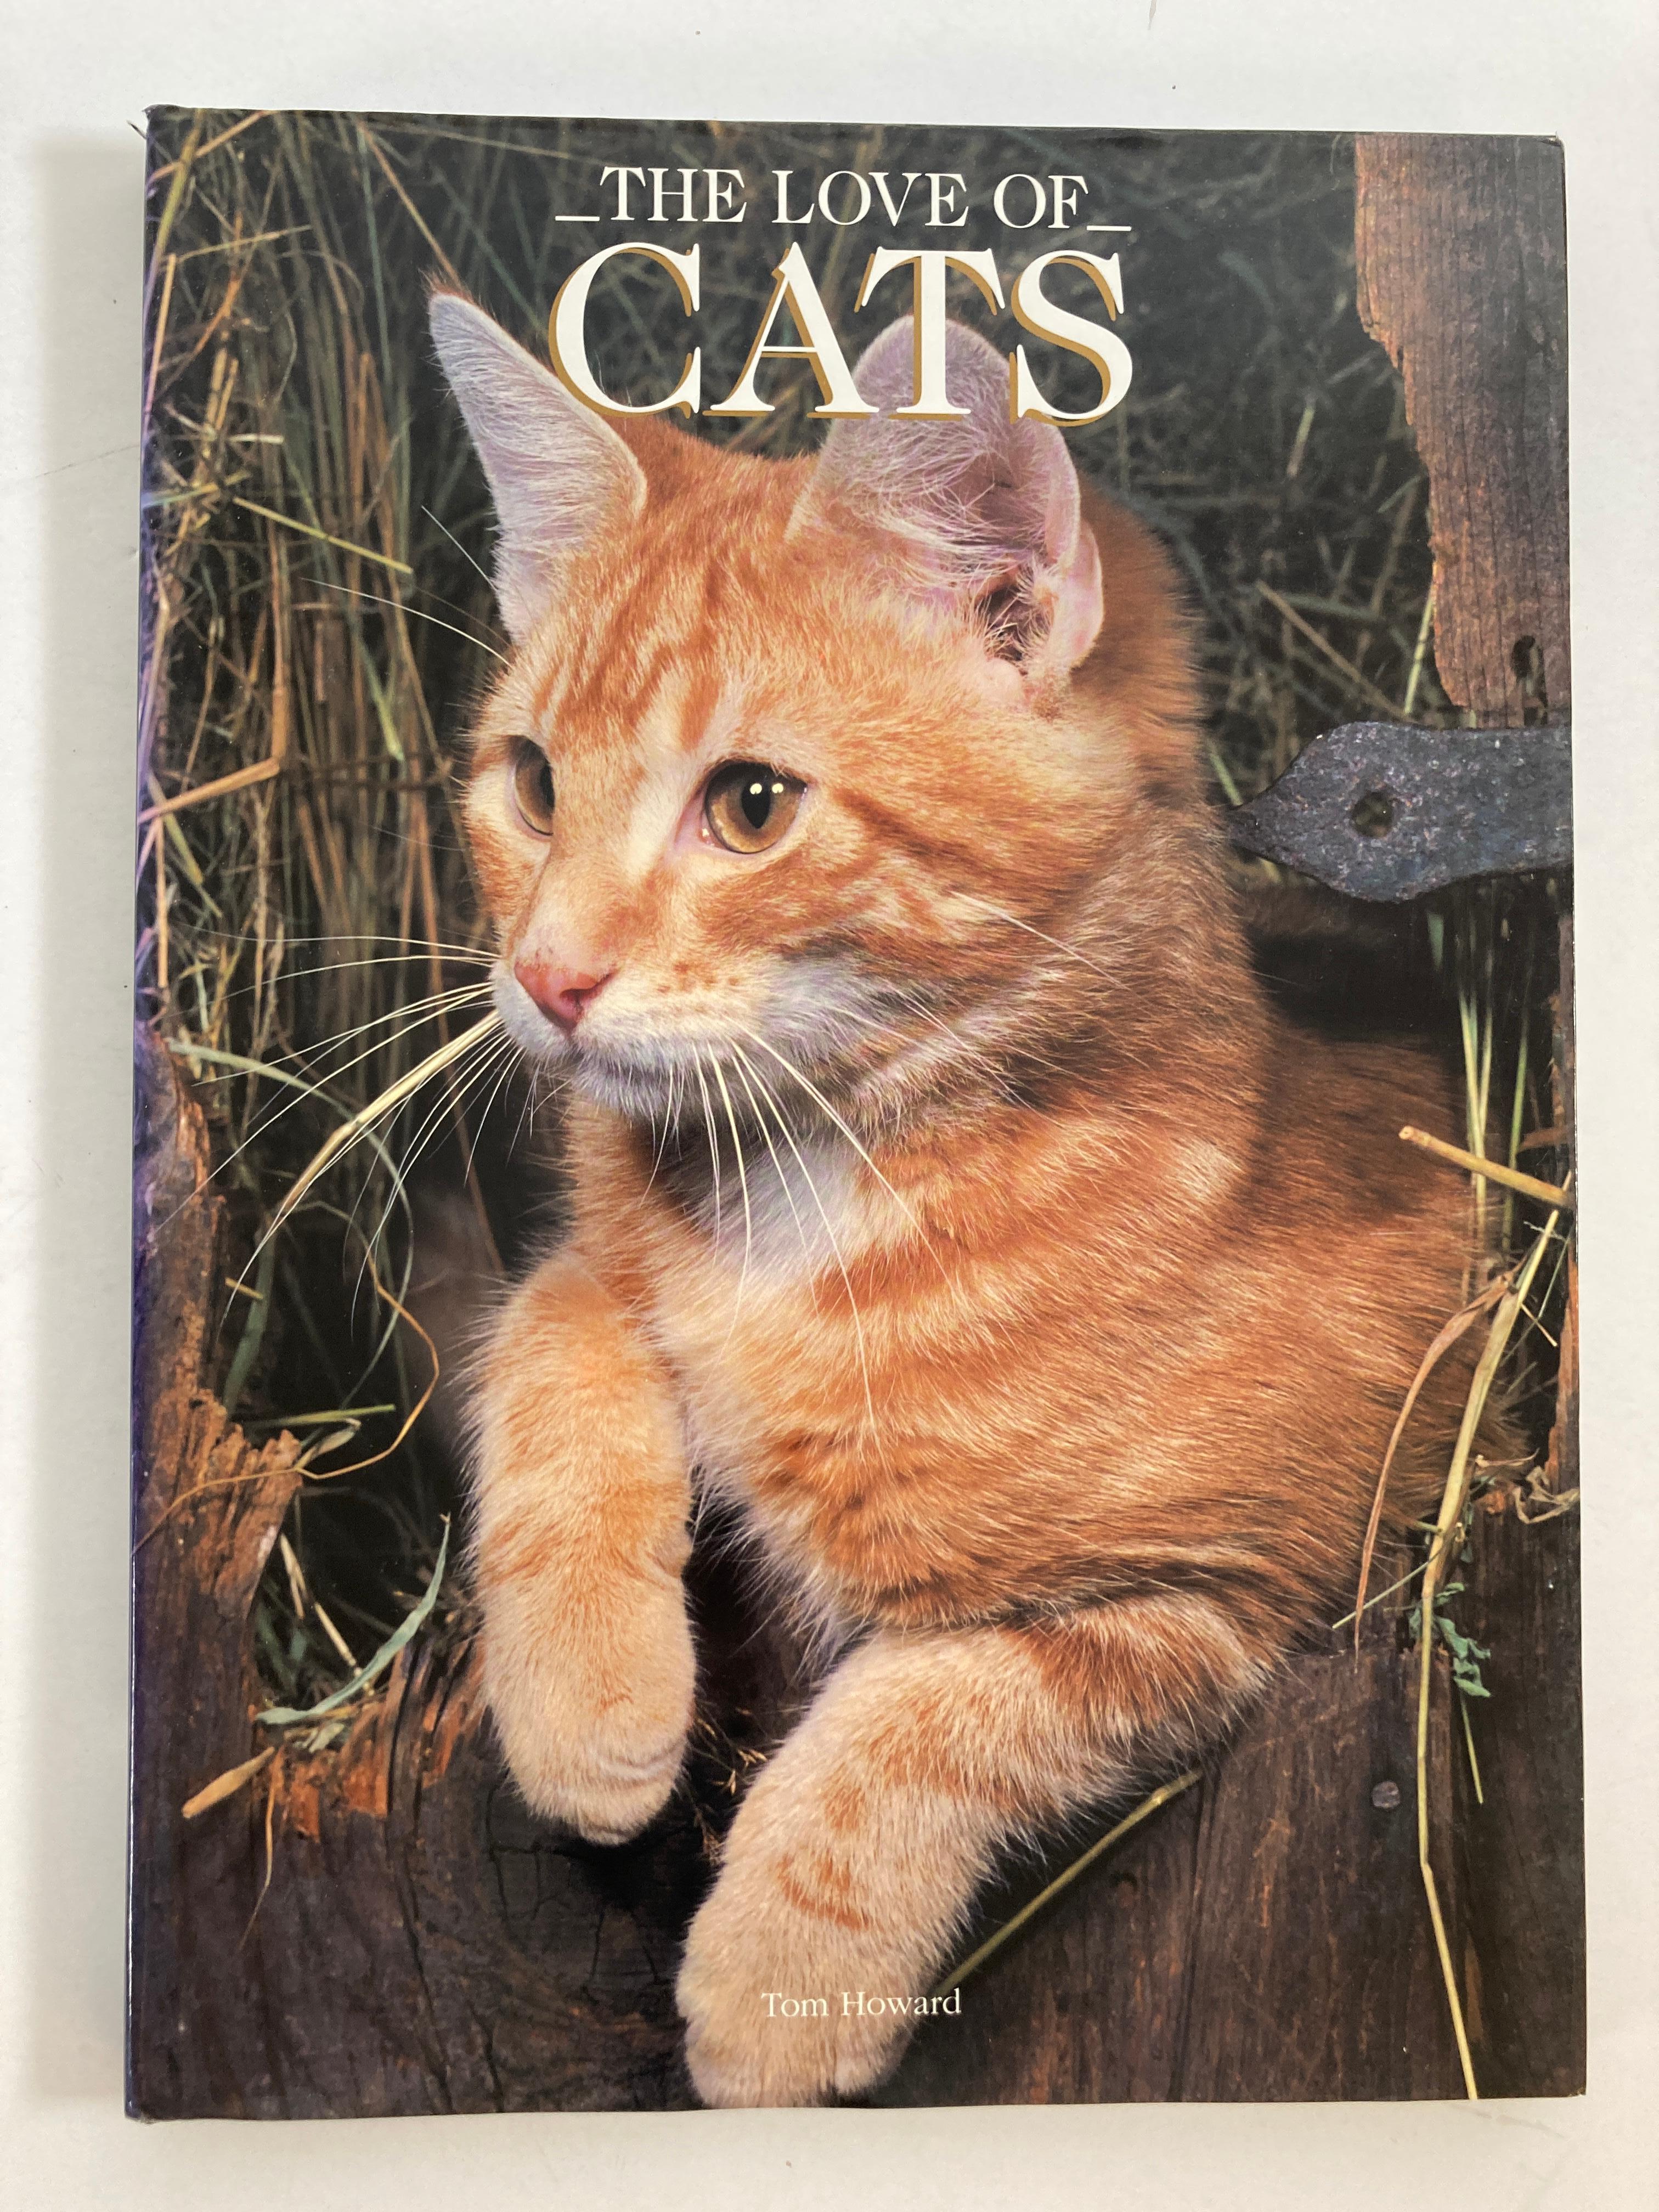 Love of Cats by Howard, Tom Hardcover Book.
Photographs depict cats as they demonstrate their physical abilities and typical behavior in a variety of common situations throughout their lives
Title
Love of Cats
Author Howard, Tom
Format/Binding